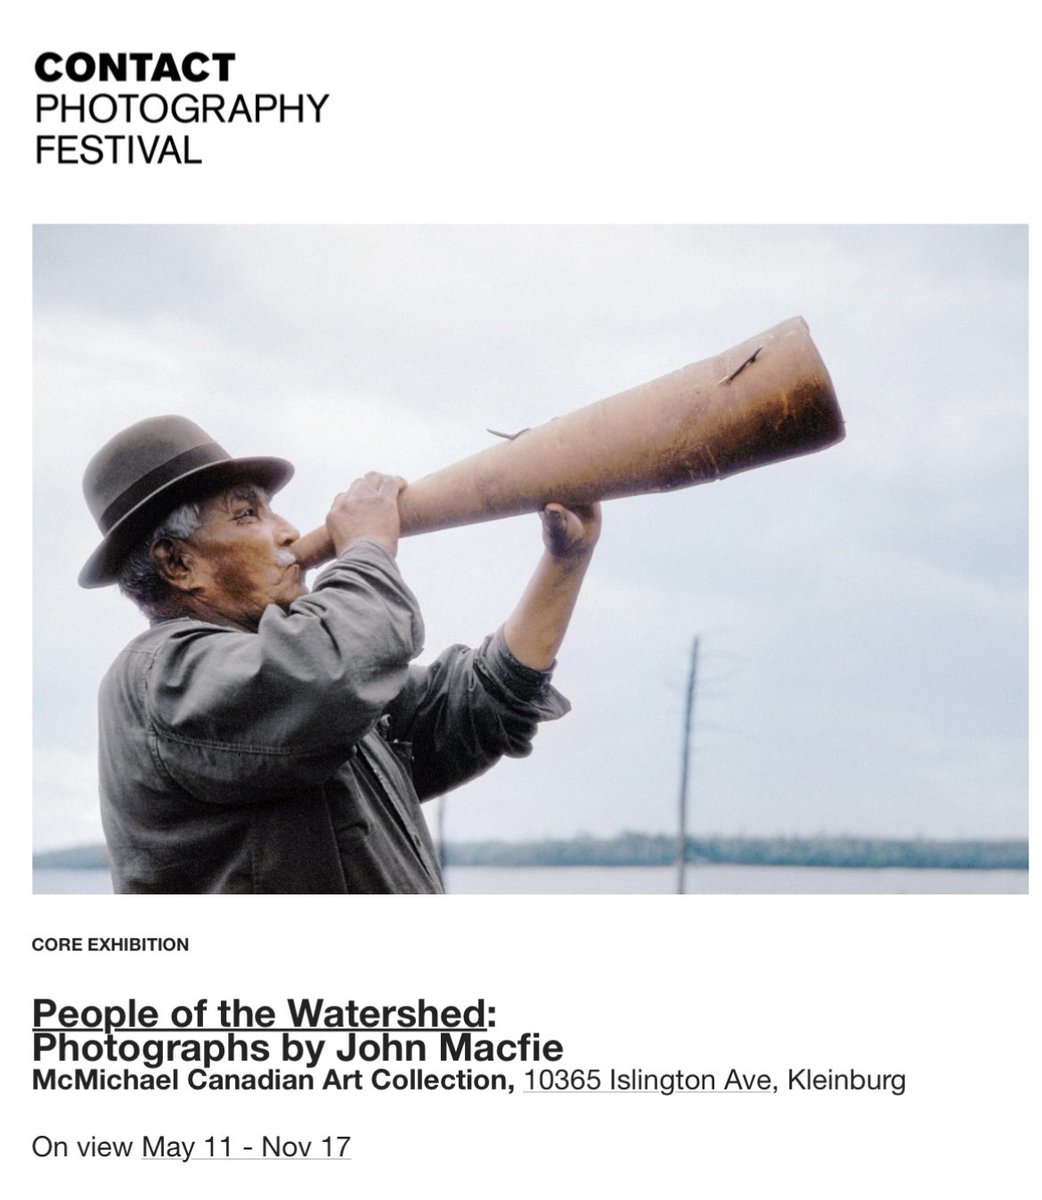 A must-see show of photographs by John Macfie (1925–2018) opens May 11 @mcacgallery, organized by @PaulSeesequasis. Macfie travelled Northern Ontario photographing life in Anishinaabe, Cree, and Anisininew communities in the 1950s + 60s, a time of pivotal change. @ContactPhoto